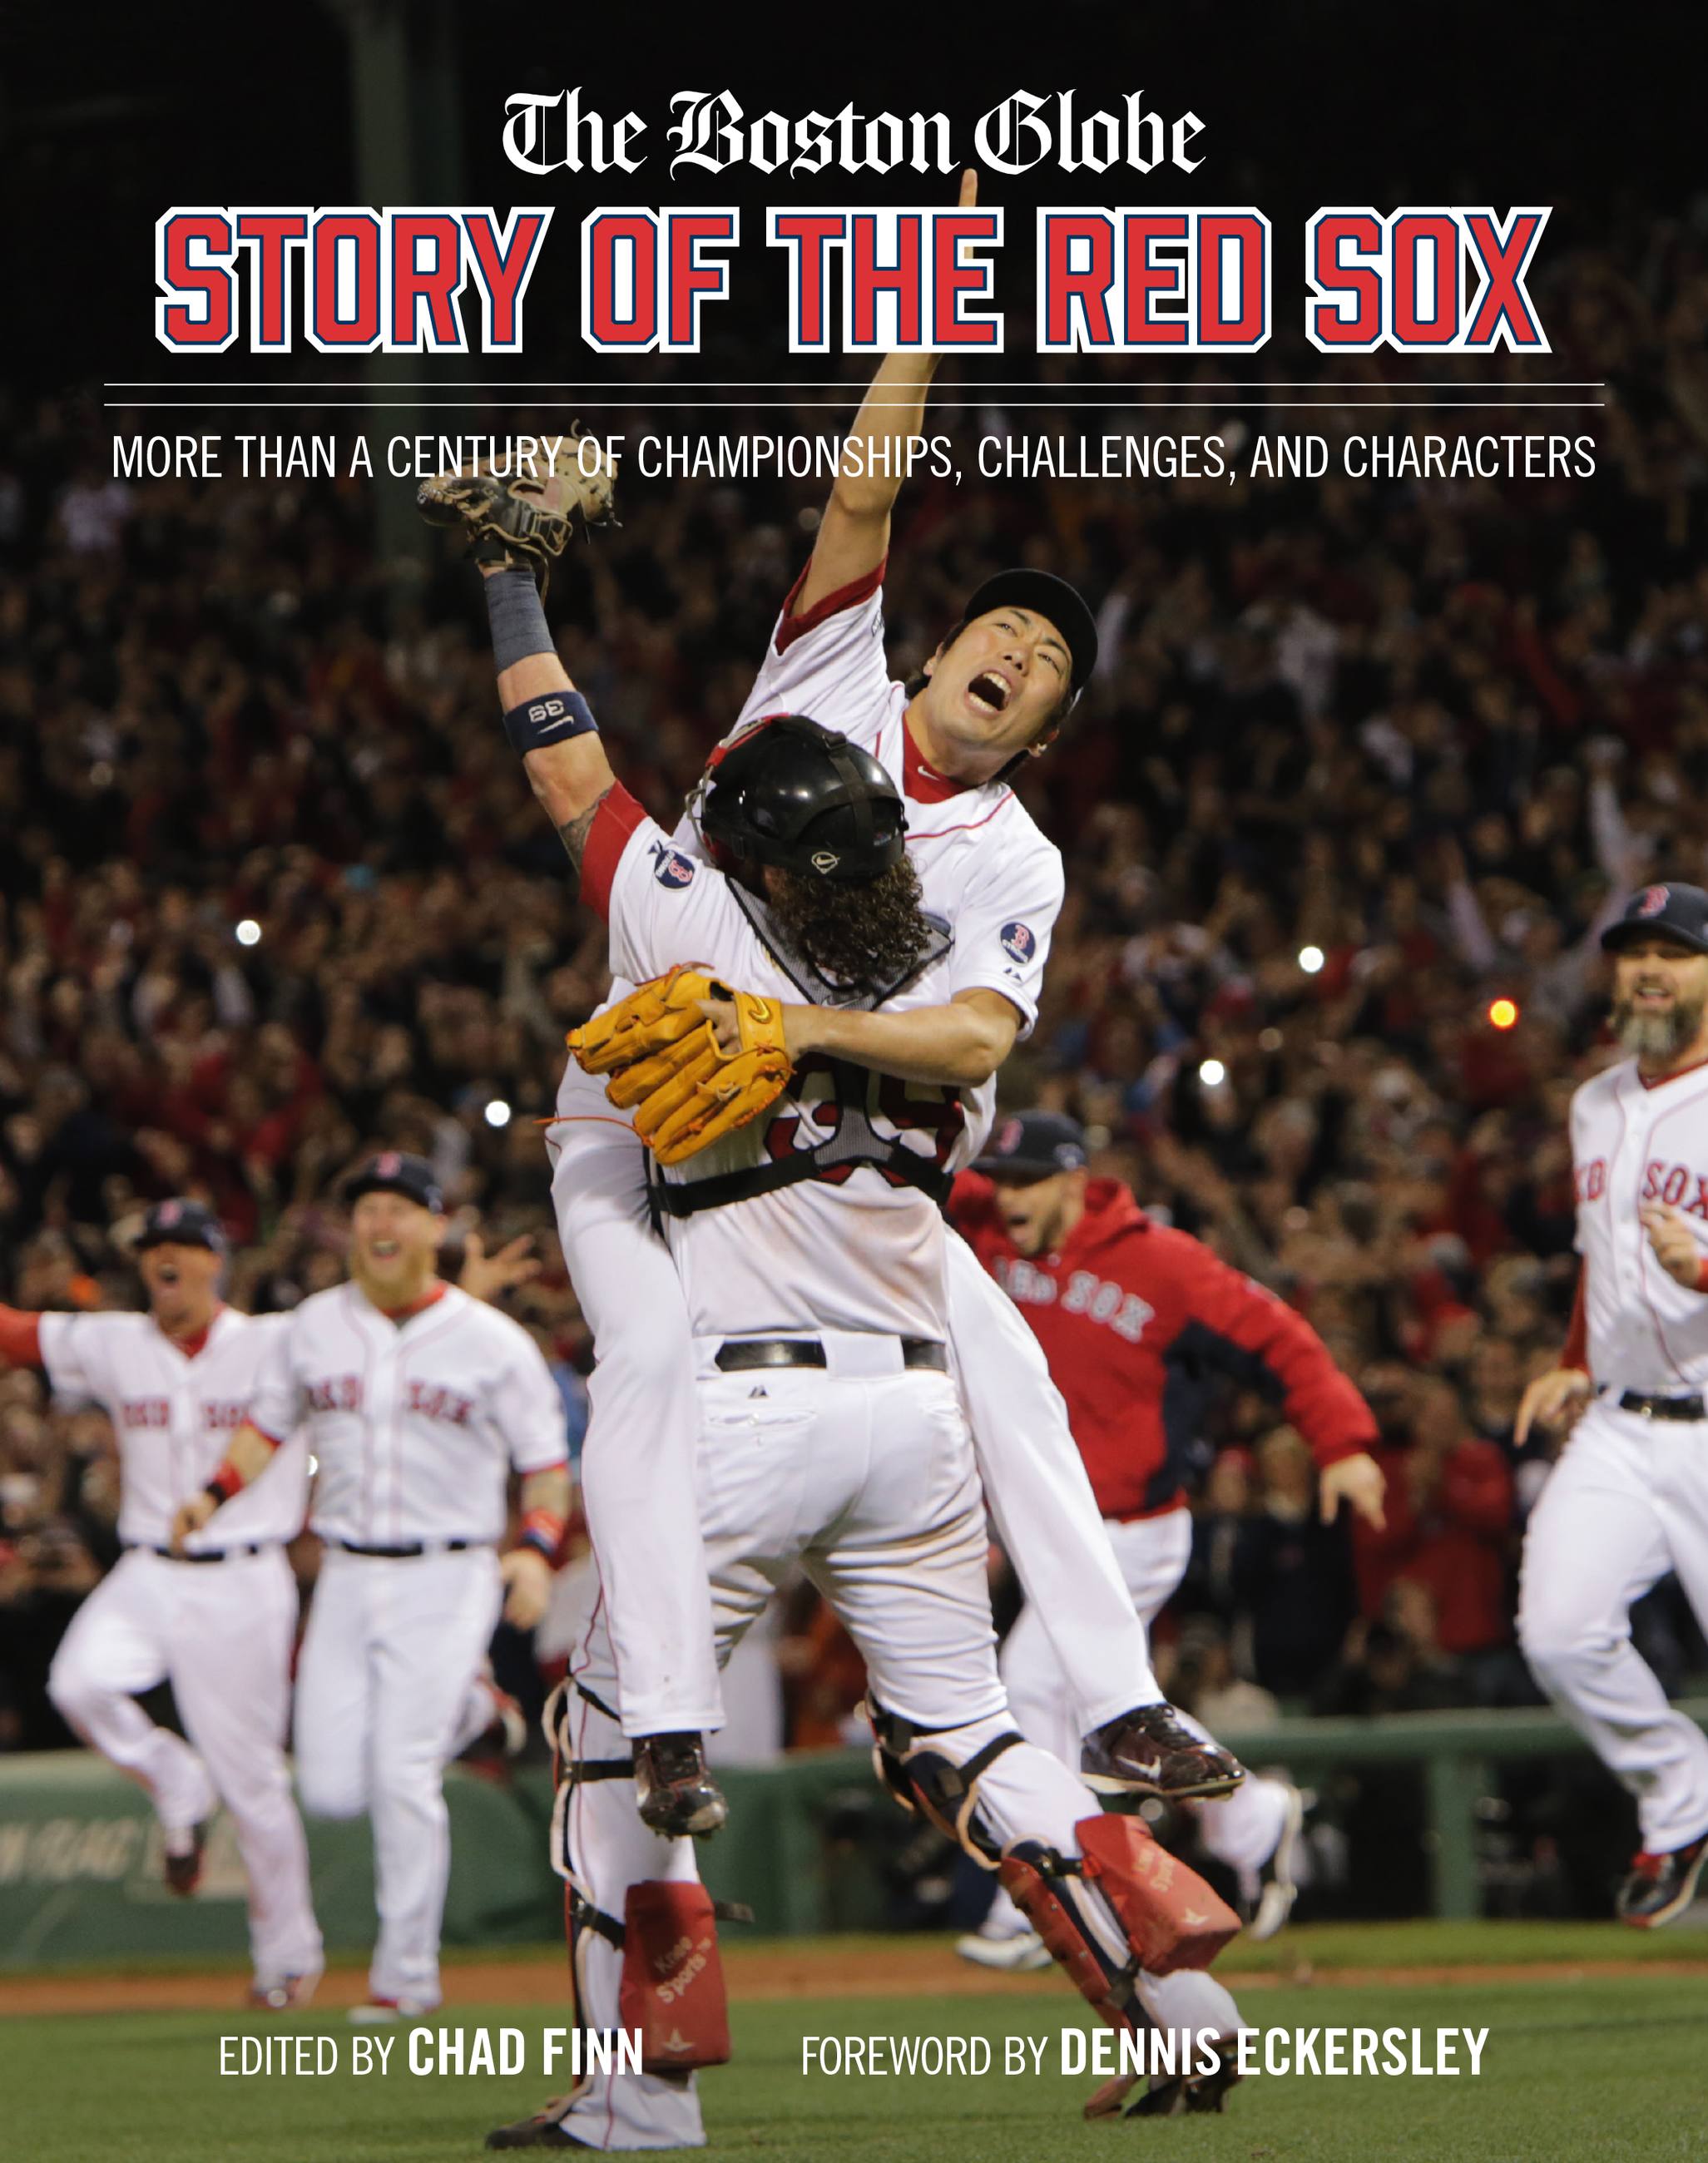 The Boston Globe Story of the Red Sox by The Boston Globe